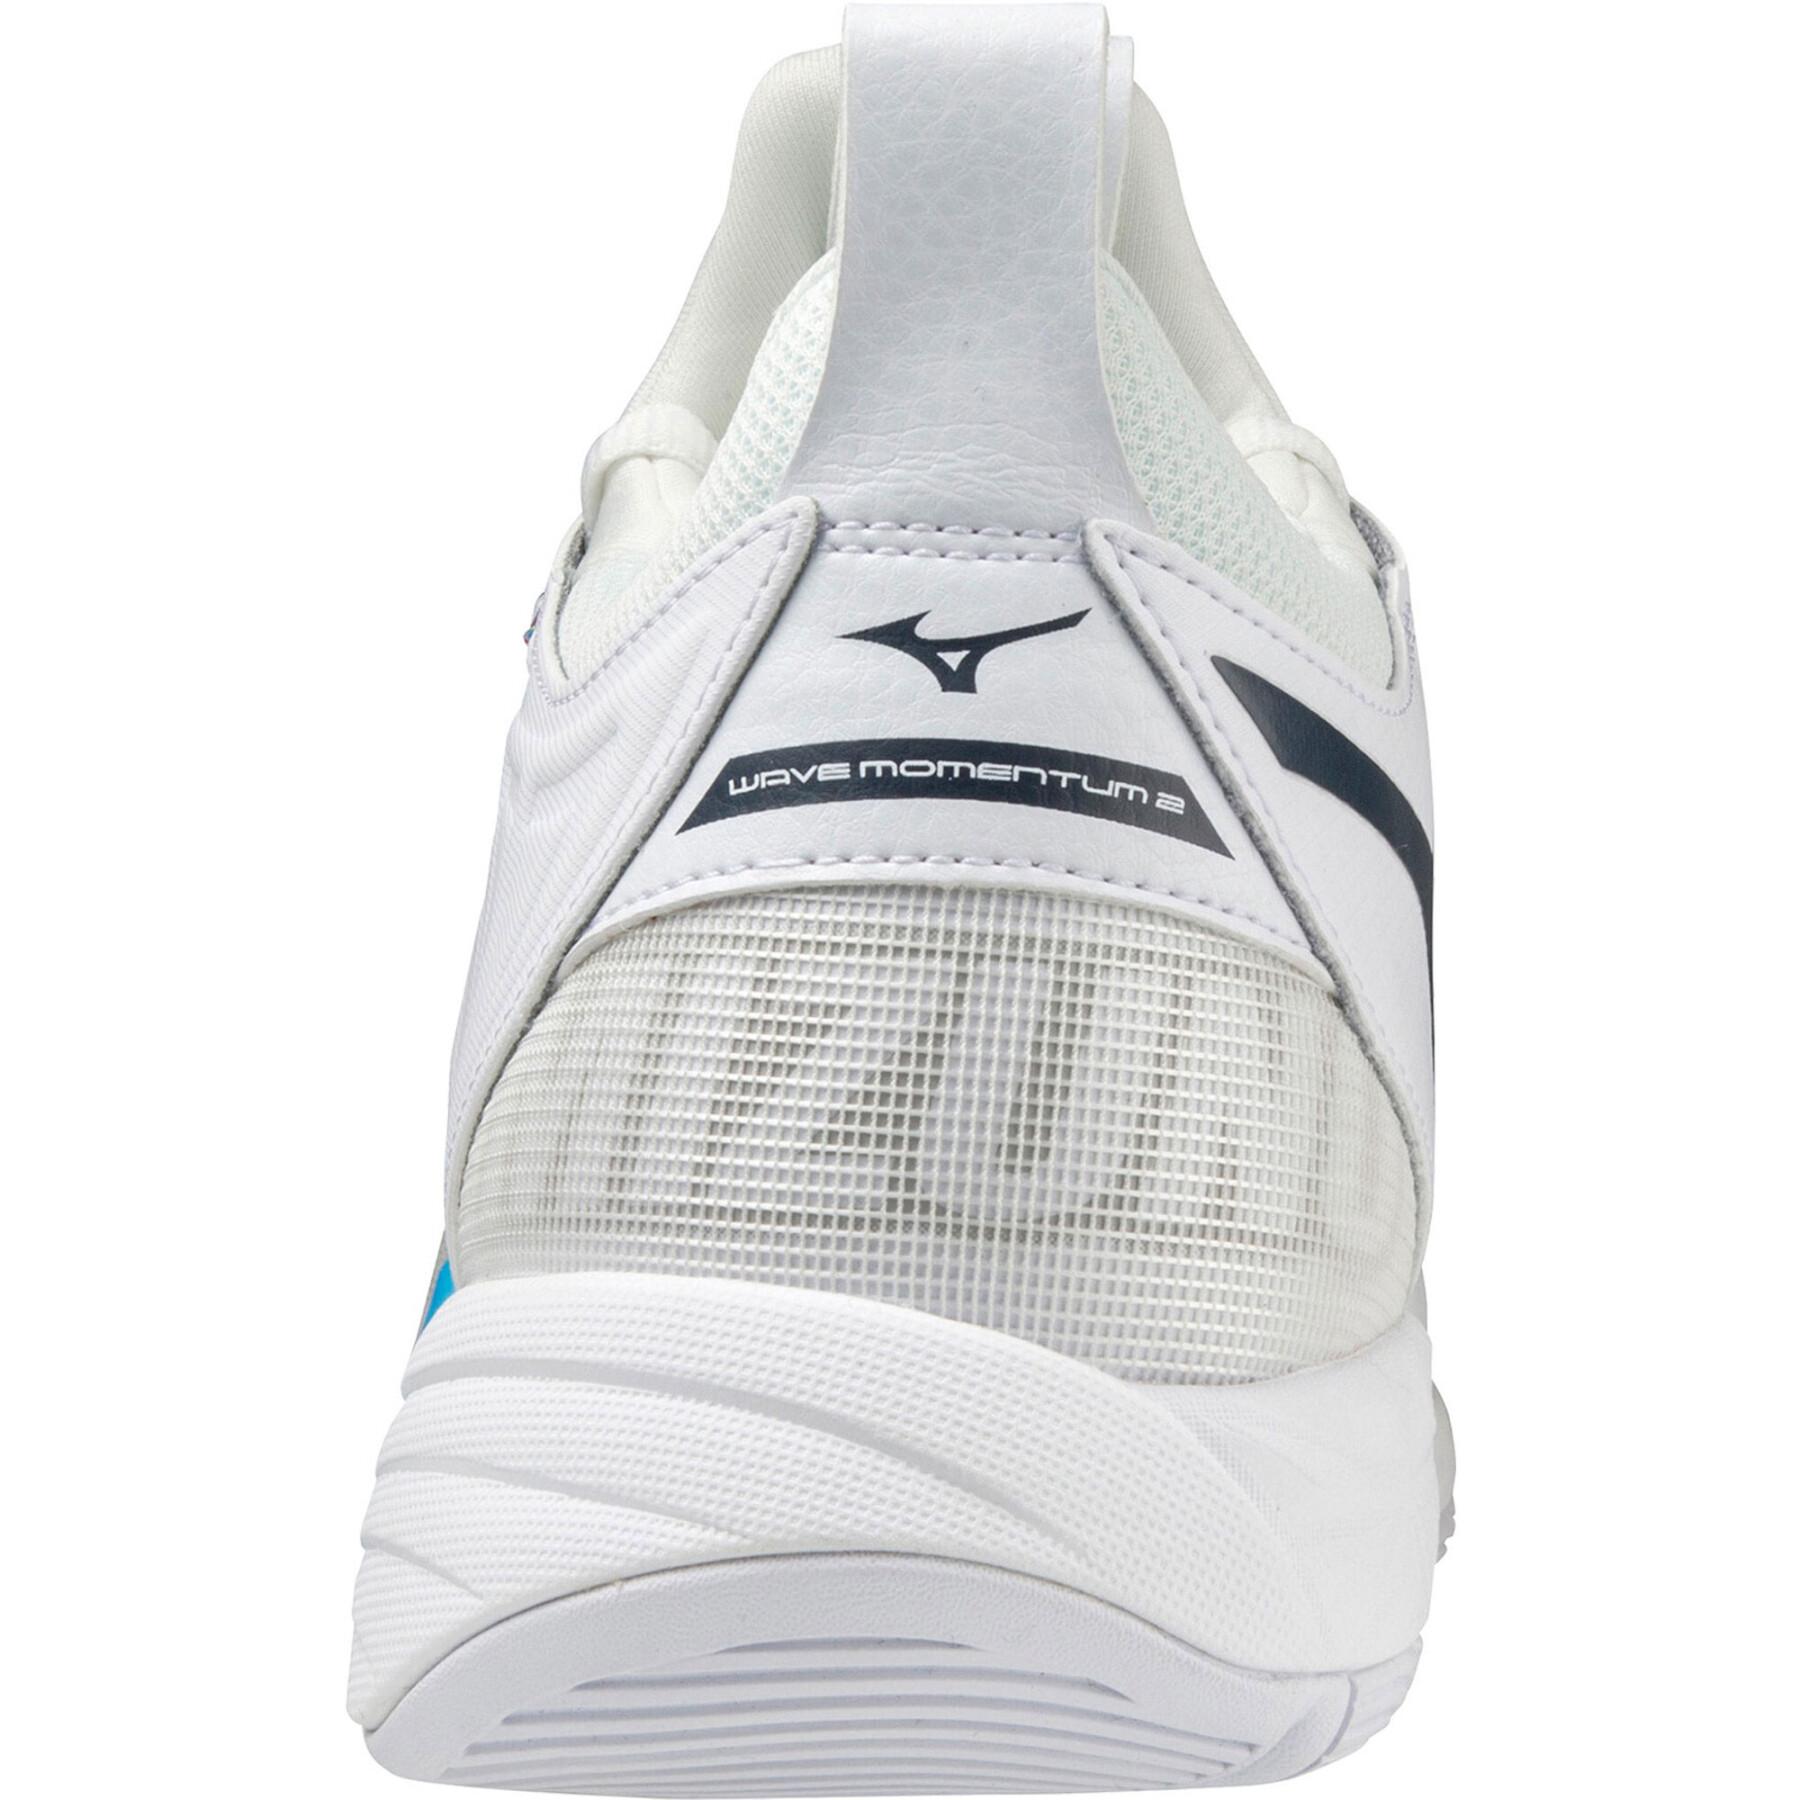 Volleyball shoes Mizuno Wave Momentum 2